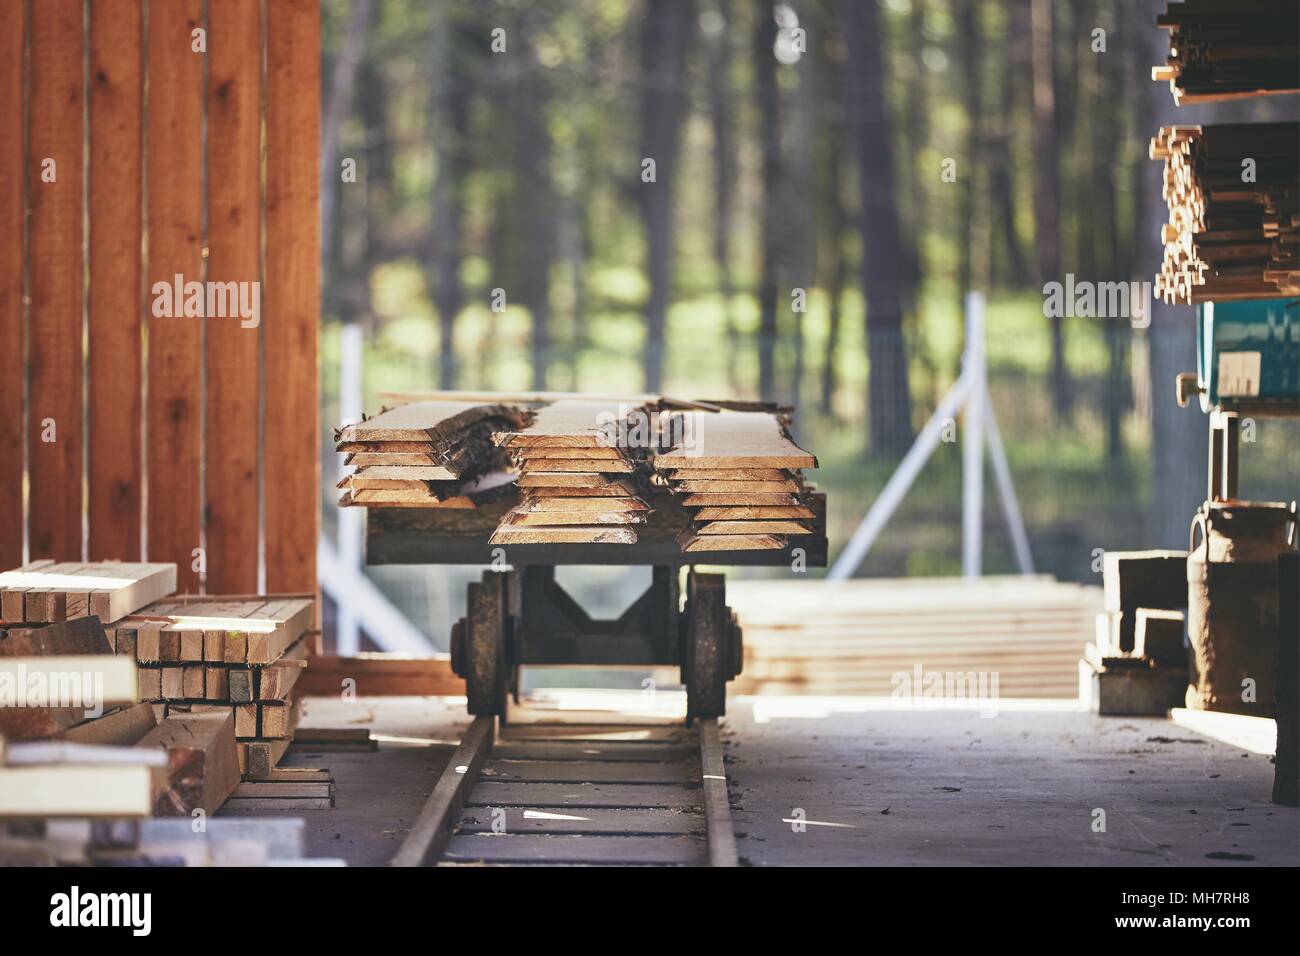 Lumber industry. Stack of the planks at the sawmill. Stock Photo